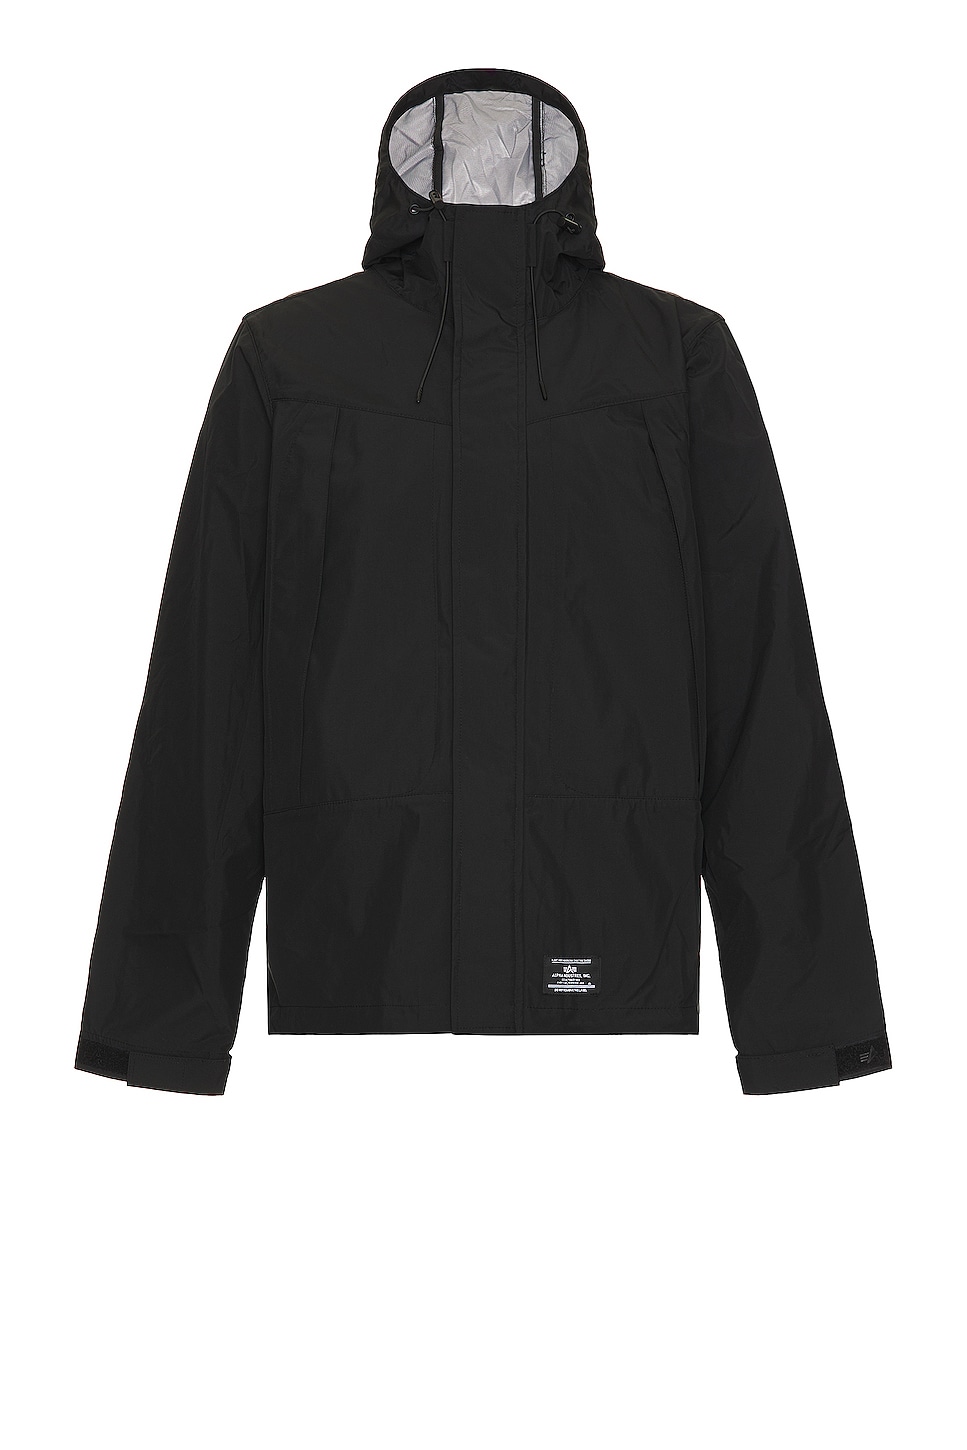 Image 1 of ALPHA INDUSTRIES Paracord Rain Shell Jacket in Black